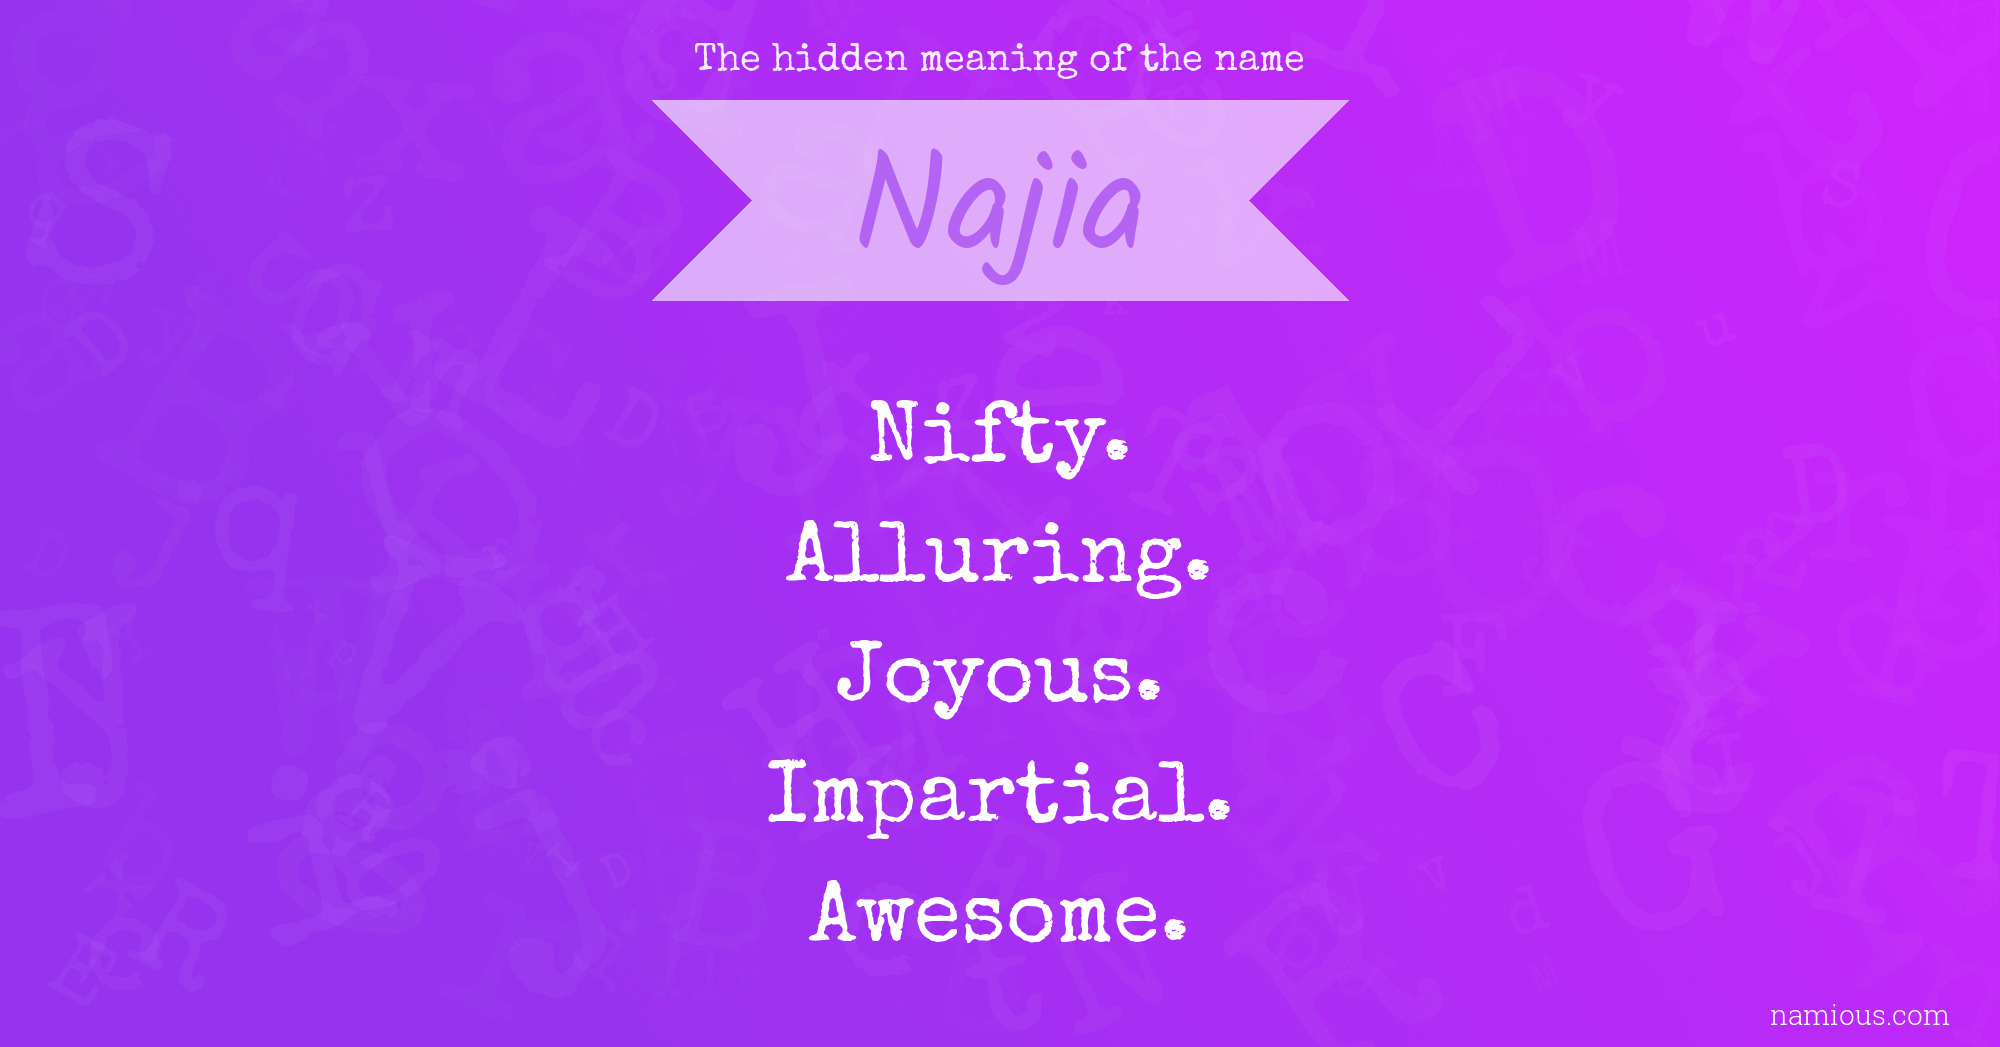 The hidden meaning of the name Najia